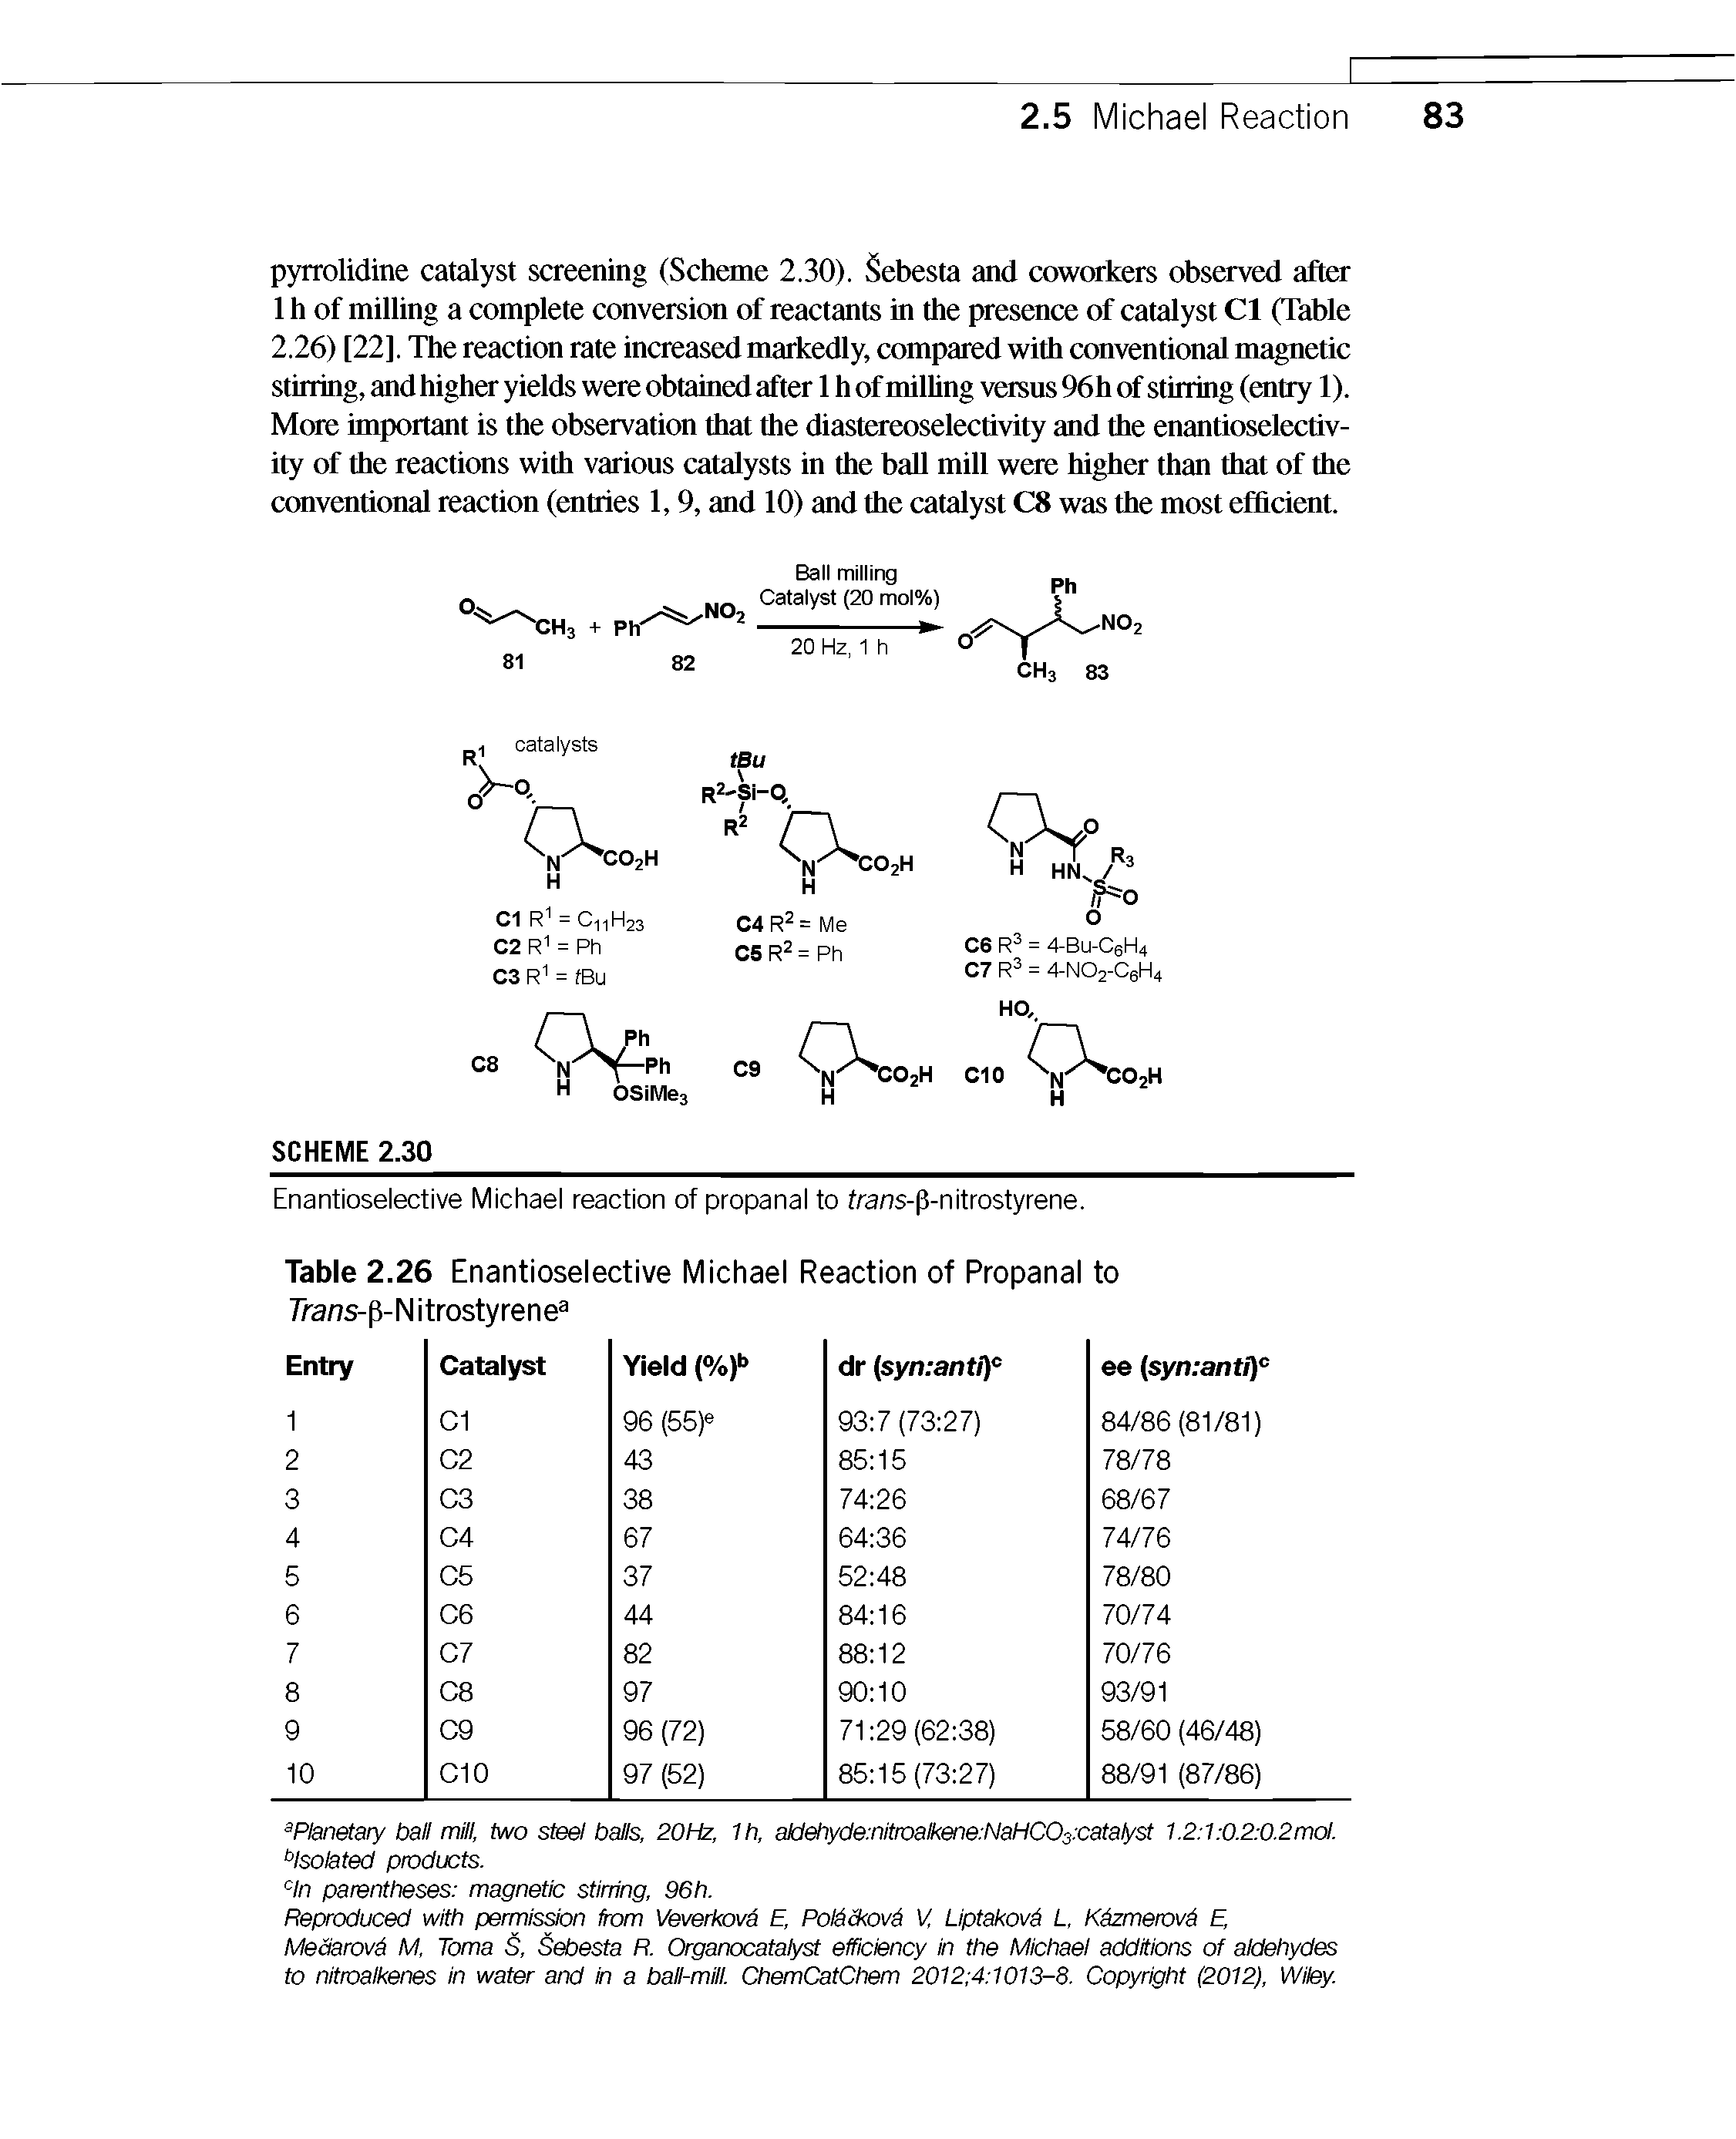 Table 2.26 Enantioselective Michael Reaction of Propanal to Trans-p-N itrostyrene ...